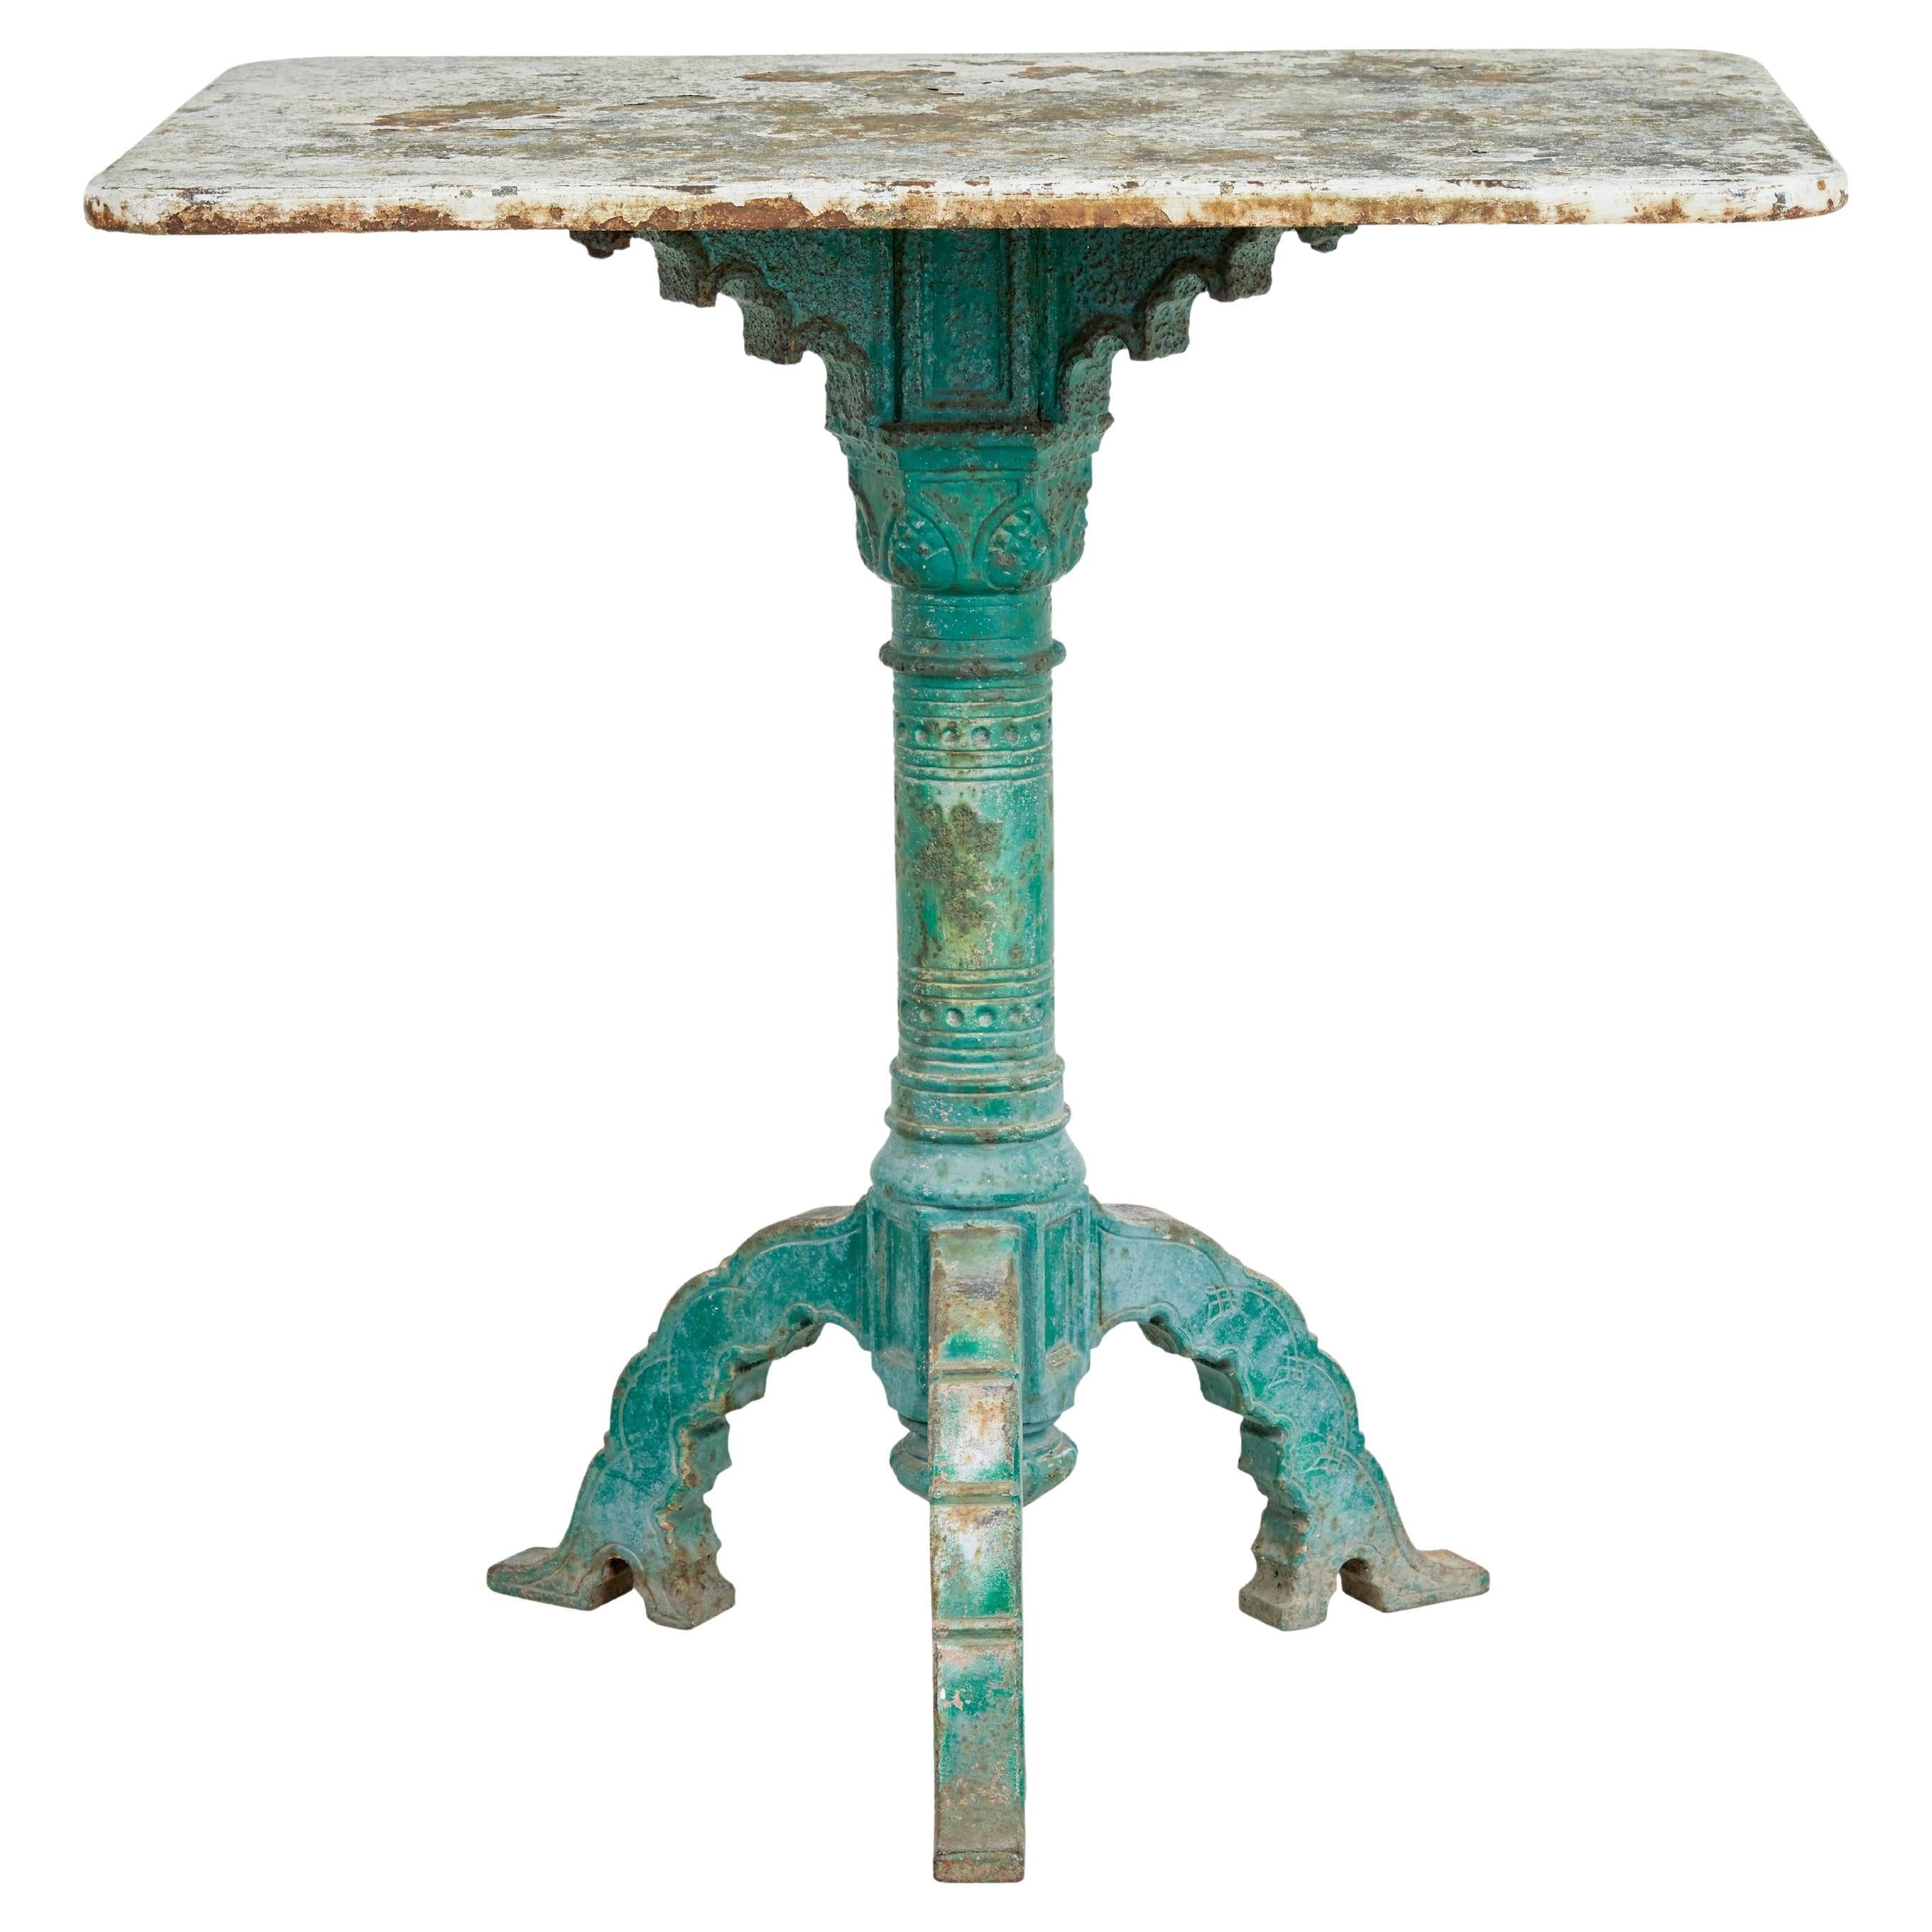 Victorian 19th century cast iron garden table For Sale